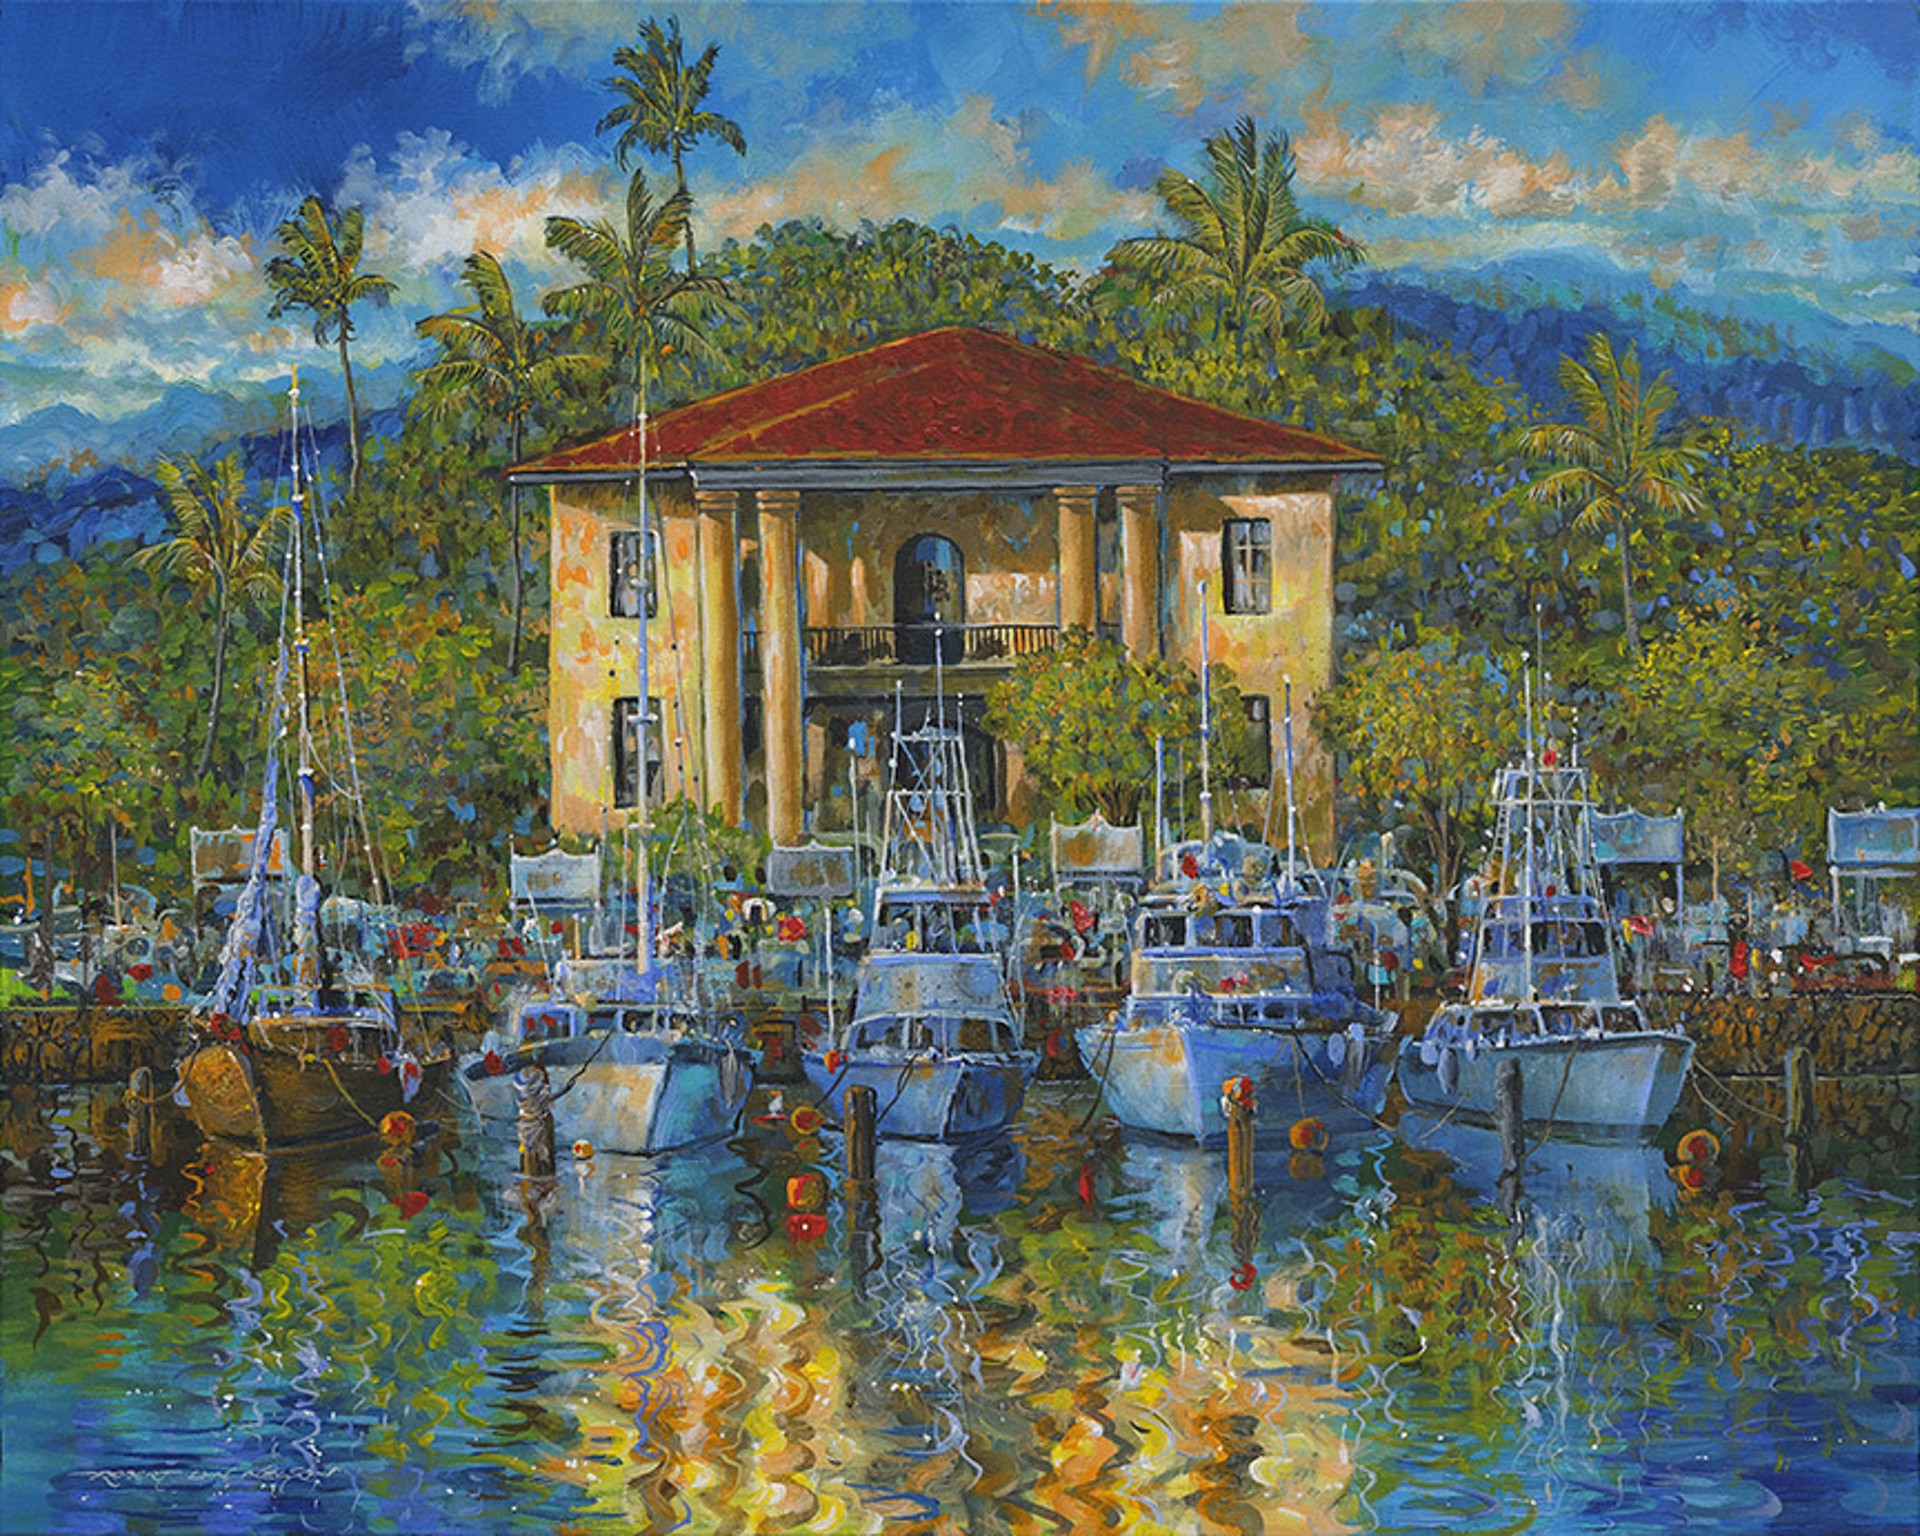 Lahaina Courthouse Reflection by Robert Lyn Nelson